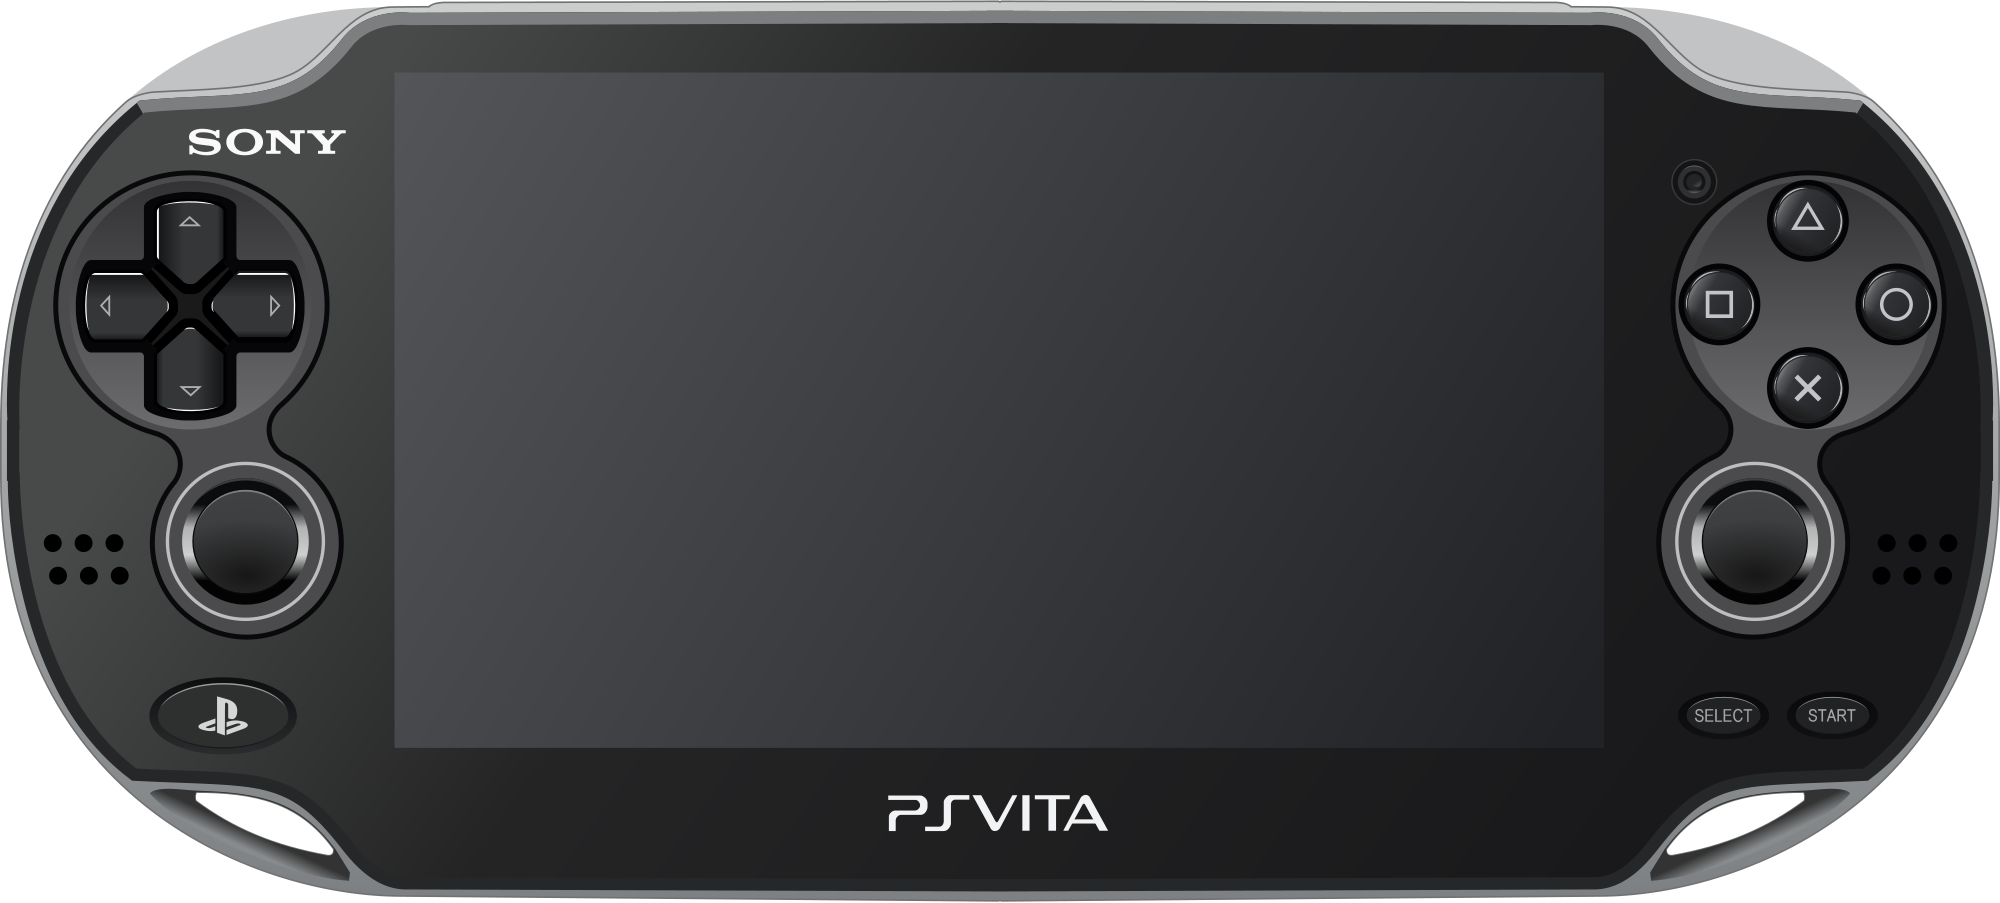 The Sony PlayStation Vita handheld portable console and controller